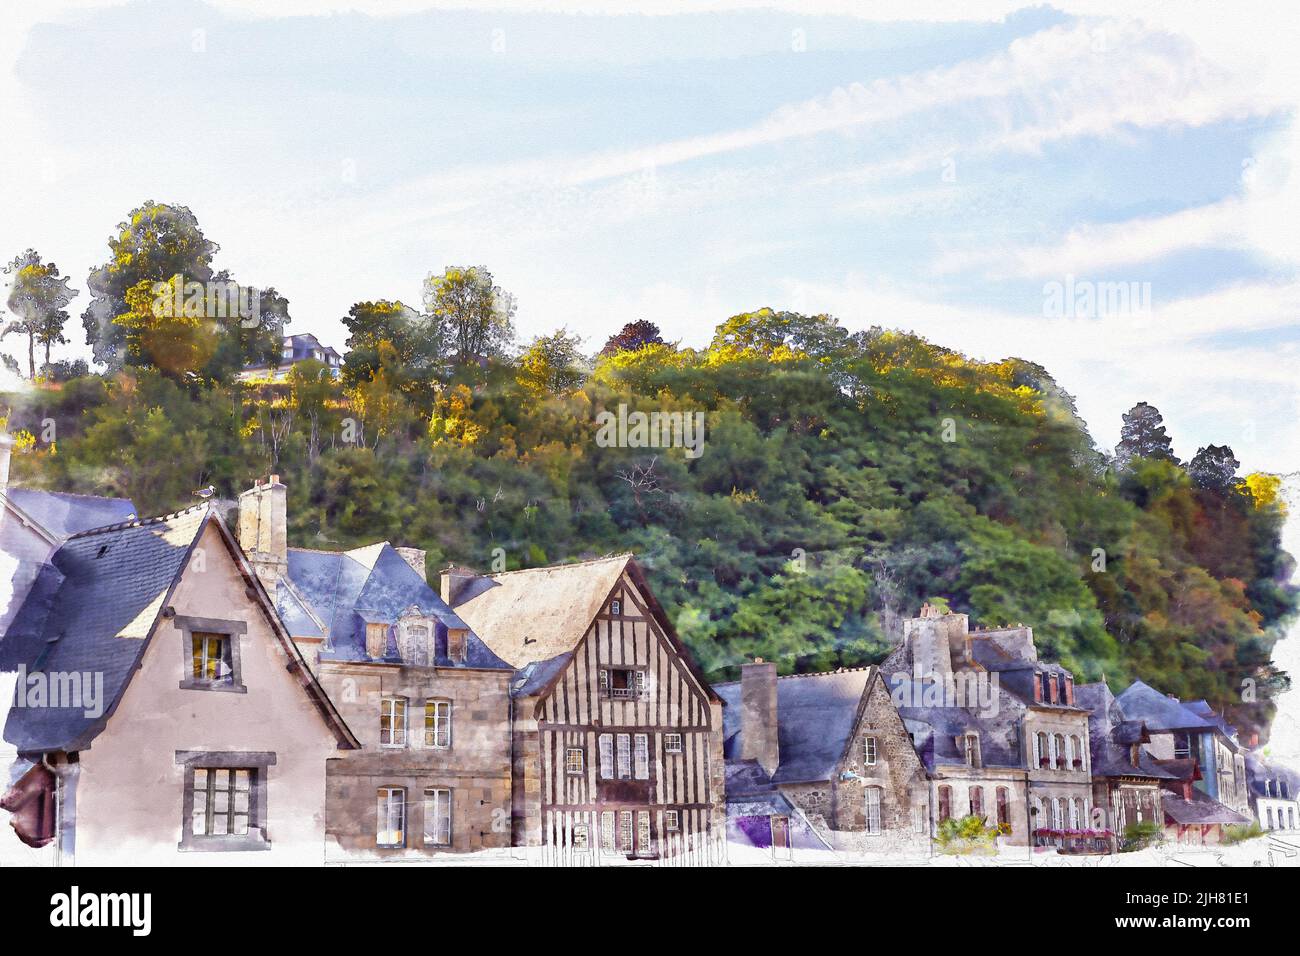 Digital Image of roofs of Dinan, France in a water color style Stock Photo